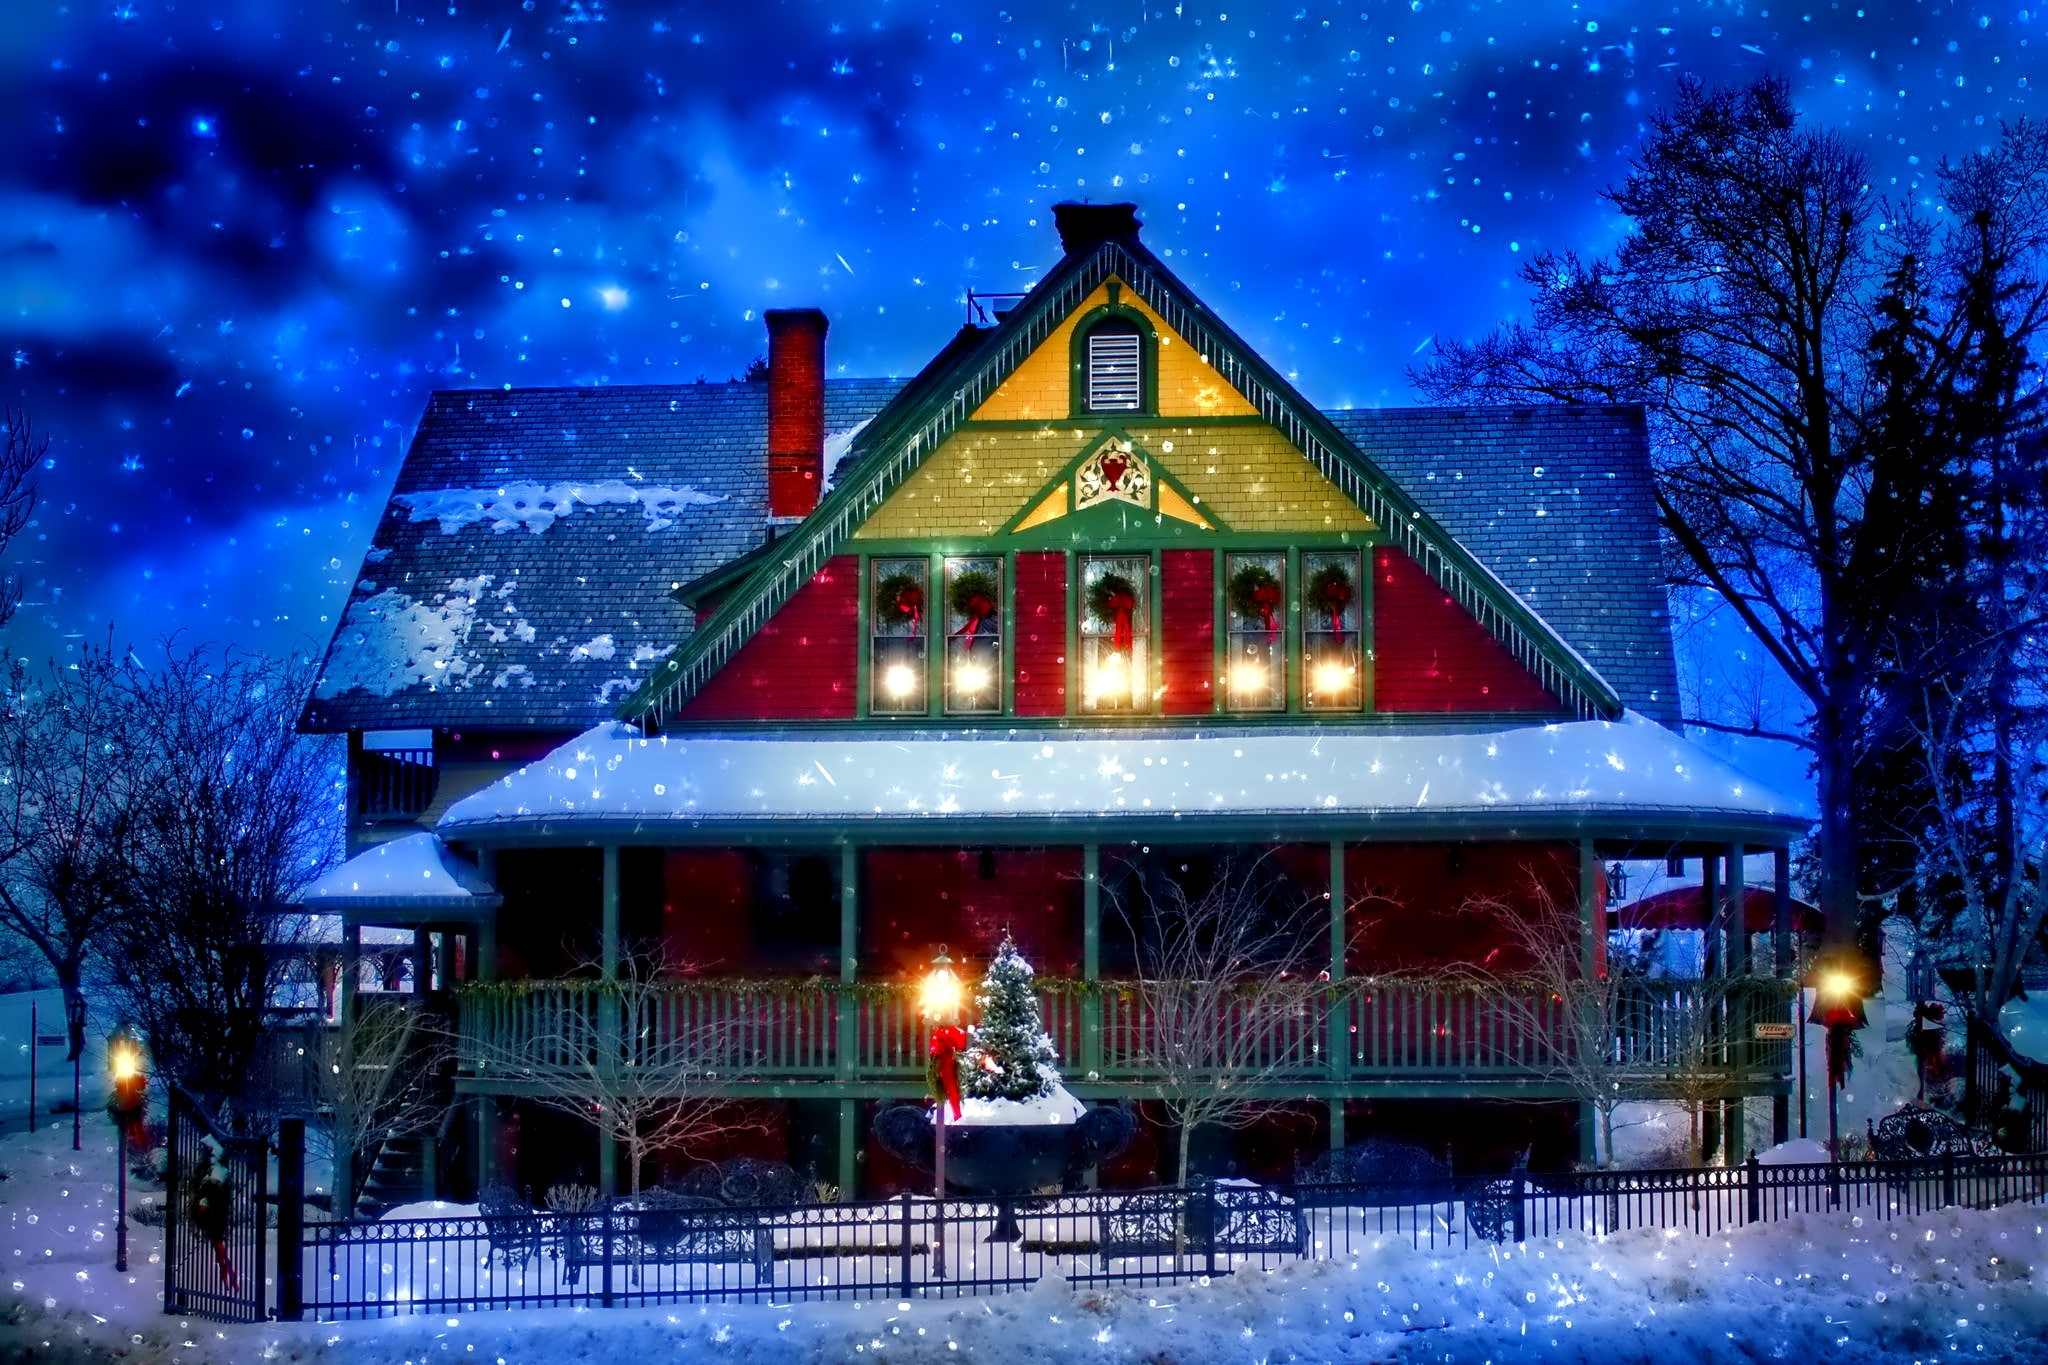 red and gray wooden house, light, snow, decoration, trees, lights